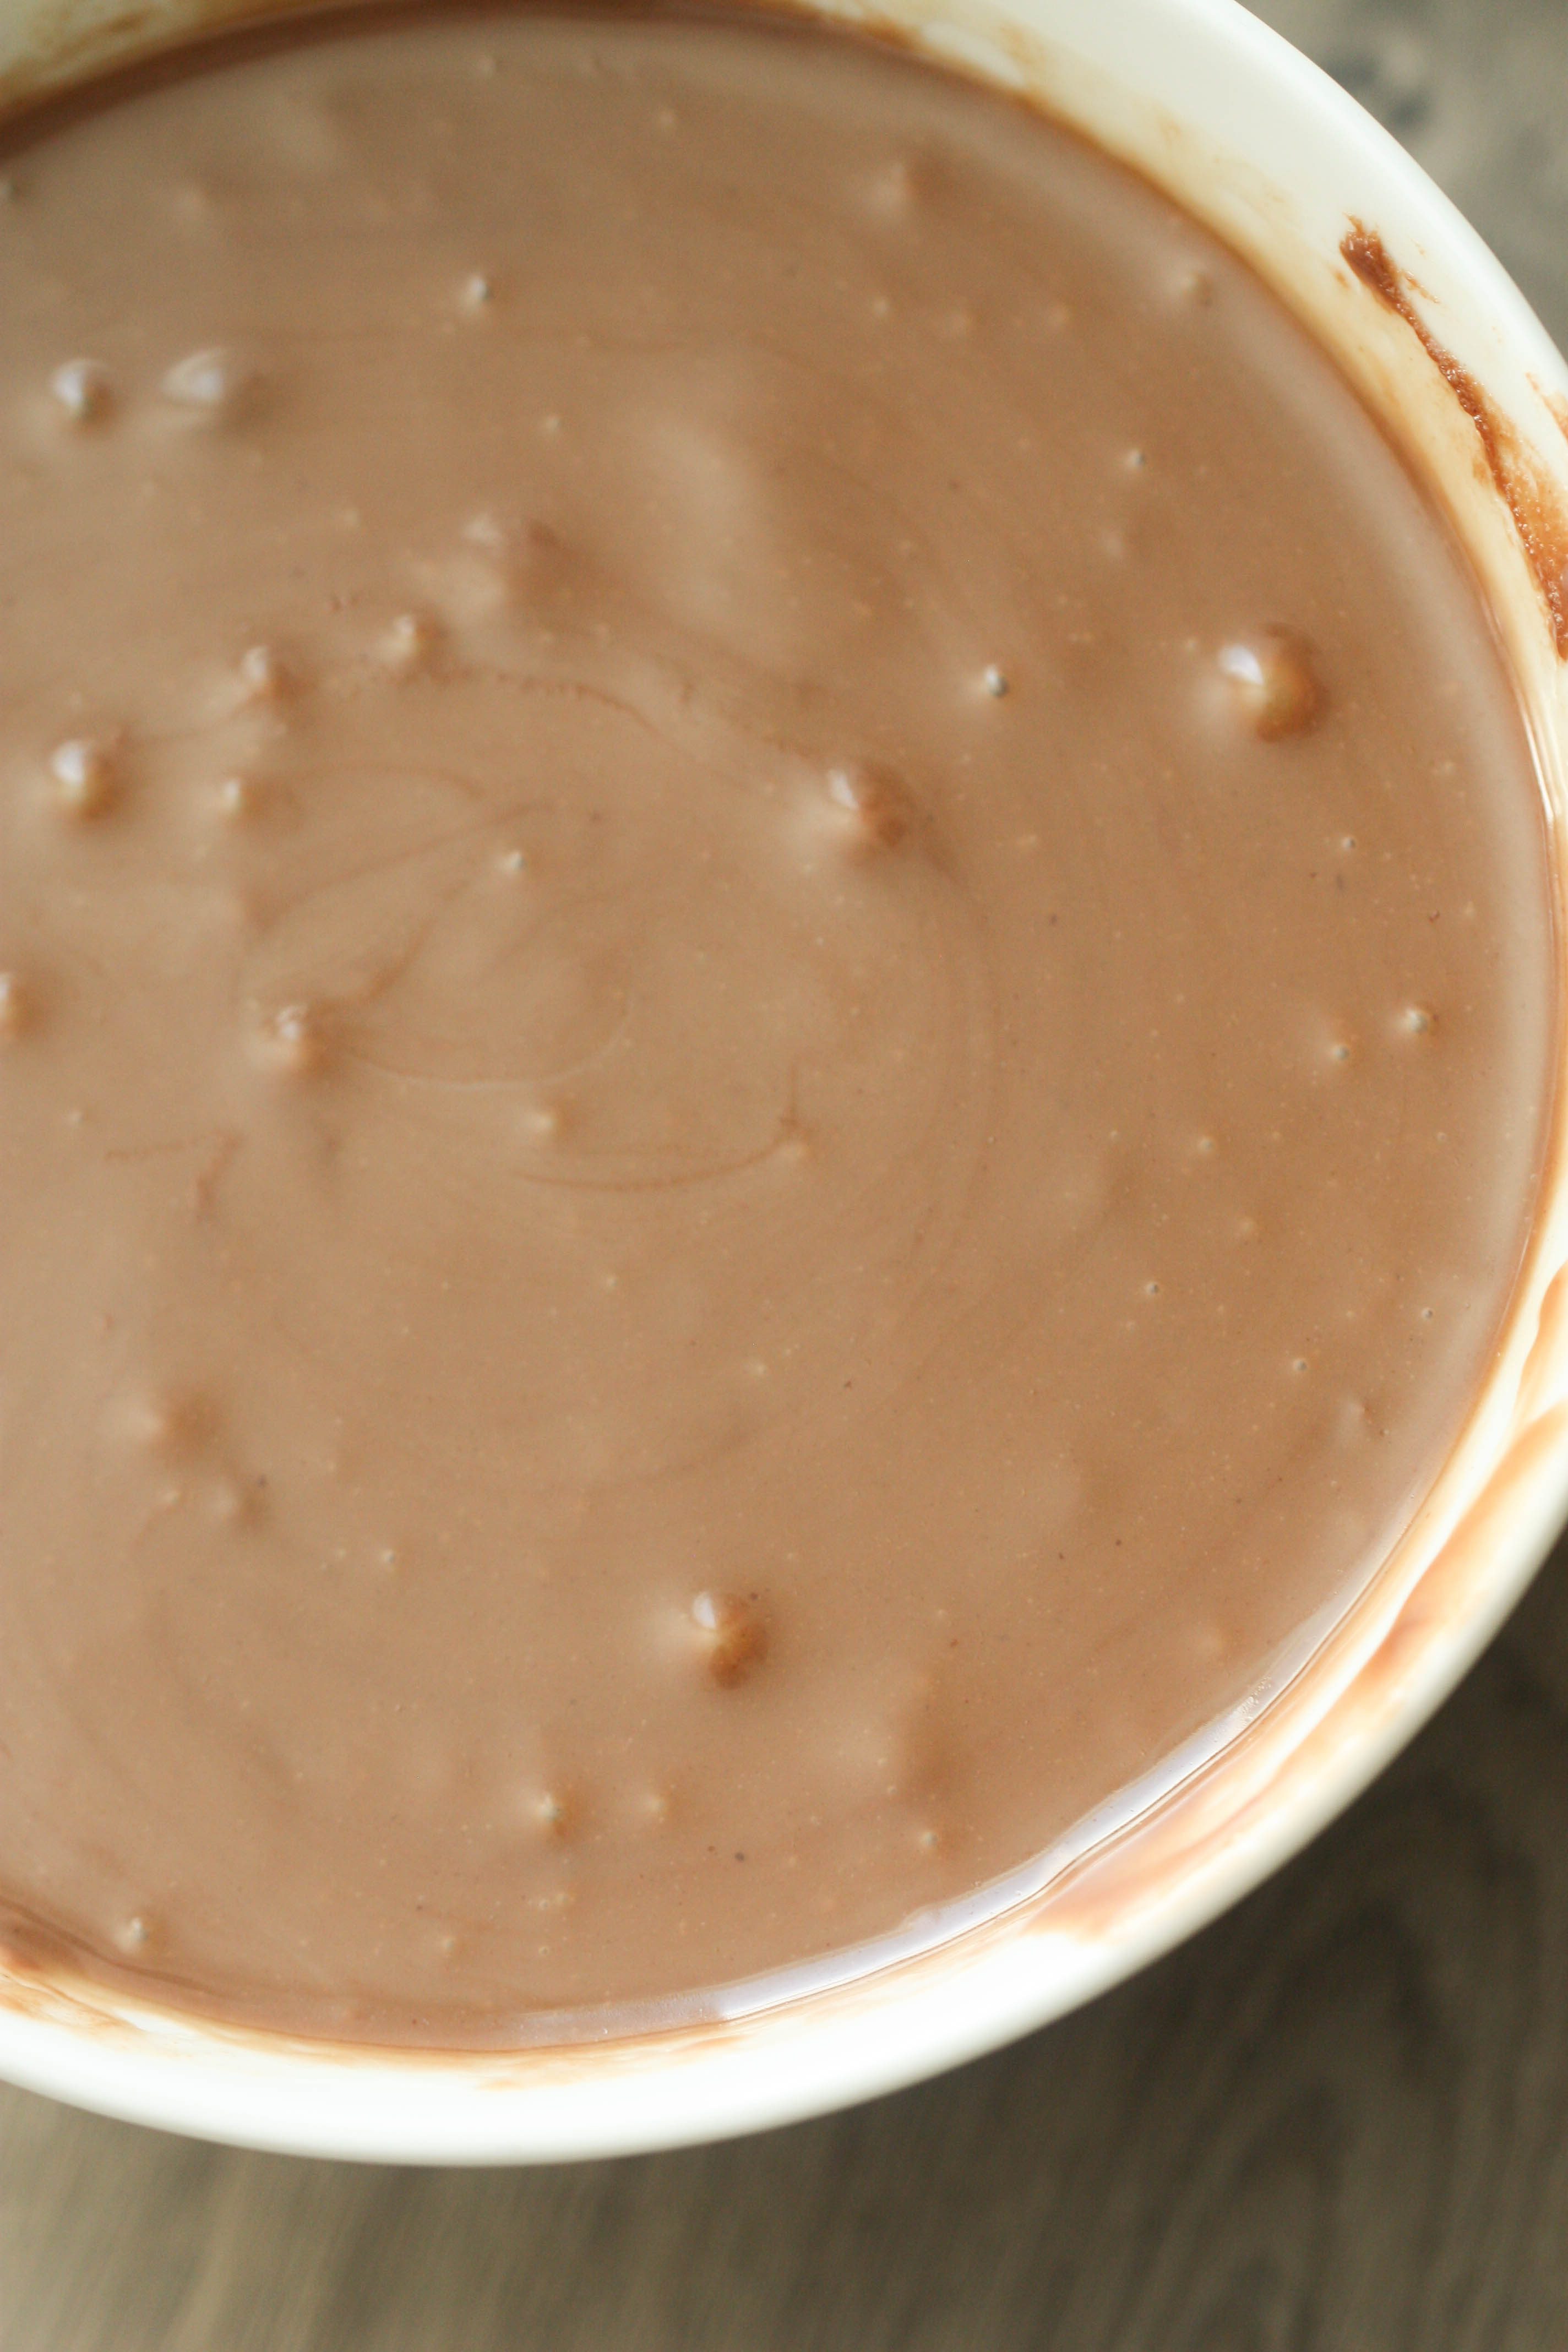 Sweetened condensed milk and chocolate peanut butter mixture mixed in a white bowl